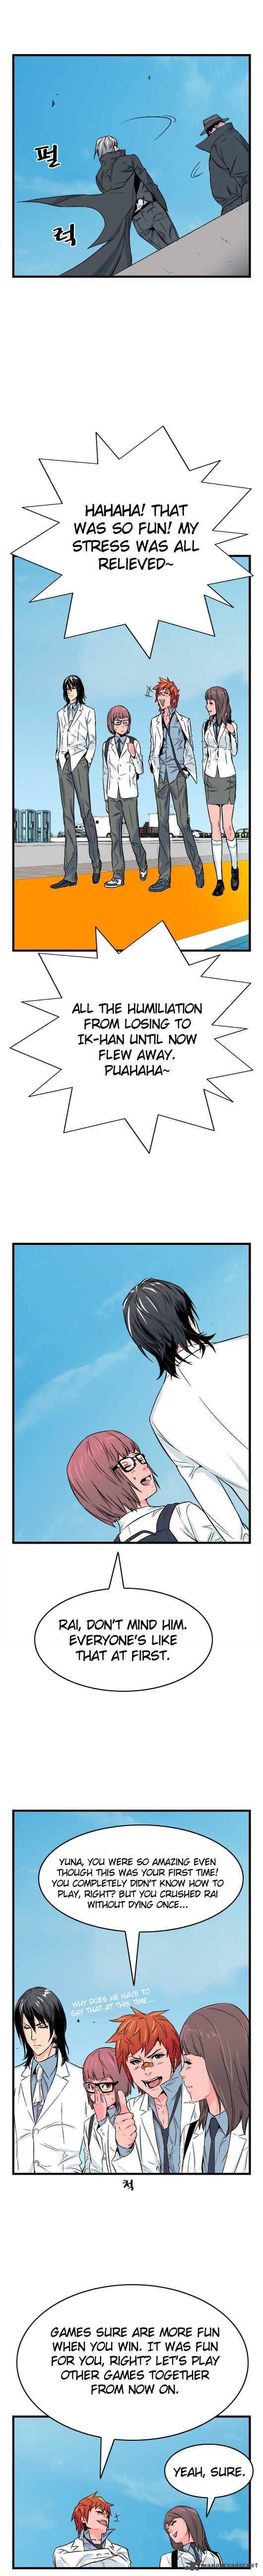 Noblesse 22 2